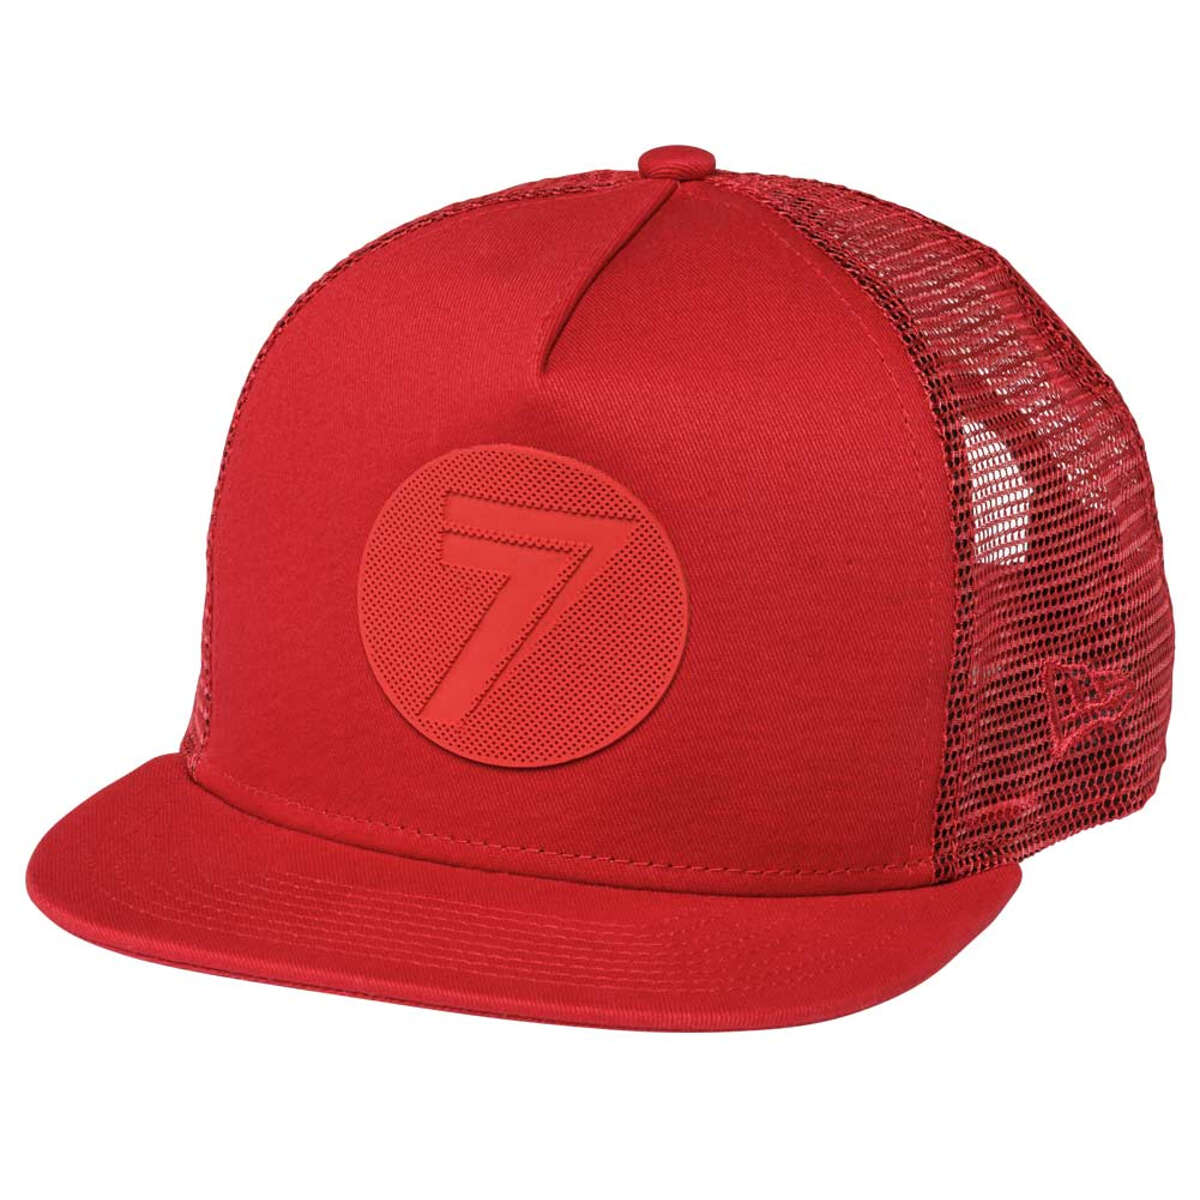 Seven MX Kids Snapback Cap Youth Dot Red/Red